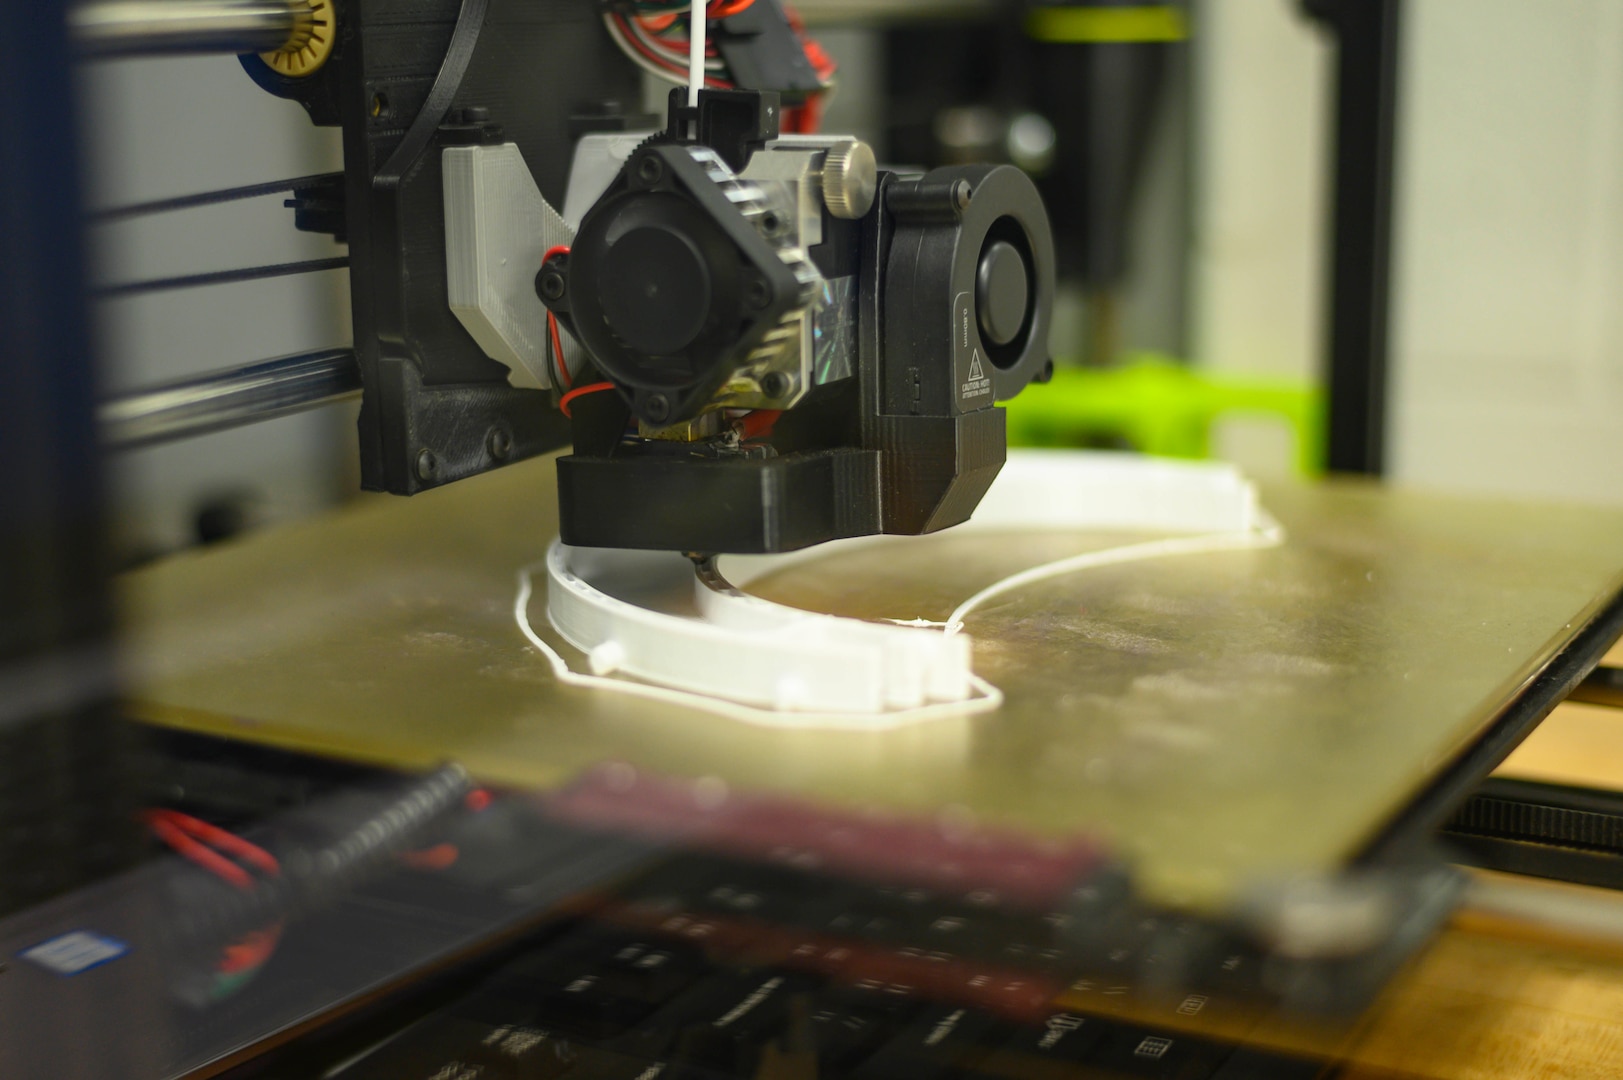 A 130th Airlift Wing LulzBot TAZ 6 Dual Platinum 3D printer prints a face-shield prototype March 27, 2020, at McLaughlin Air National Guard Base, Charleston, W.Va. The 130th Airlift Wing used the printer to develop a prototype face shield for production to fulfill a statewide shortage caused by the COVID-19 outbreak.